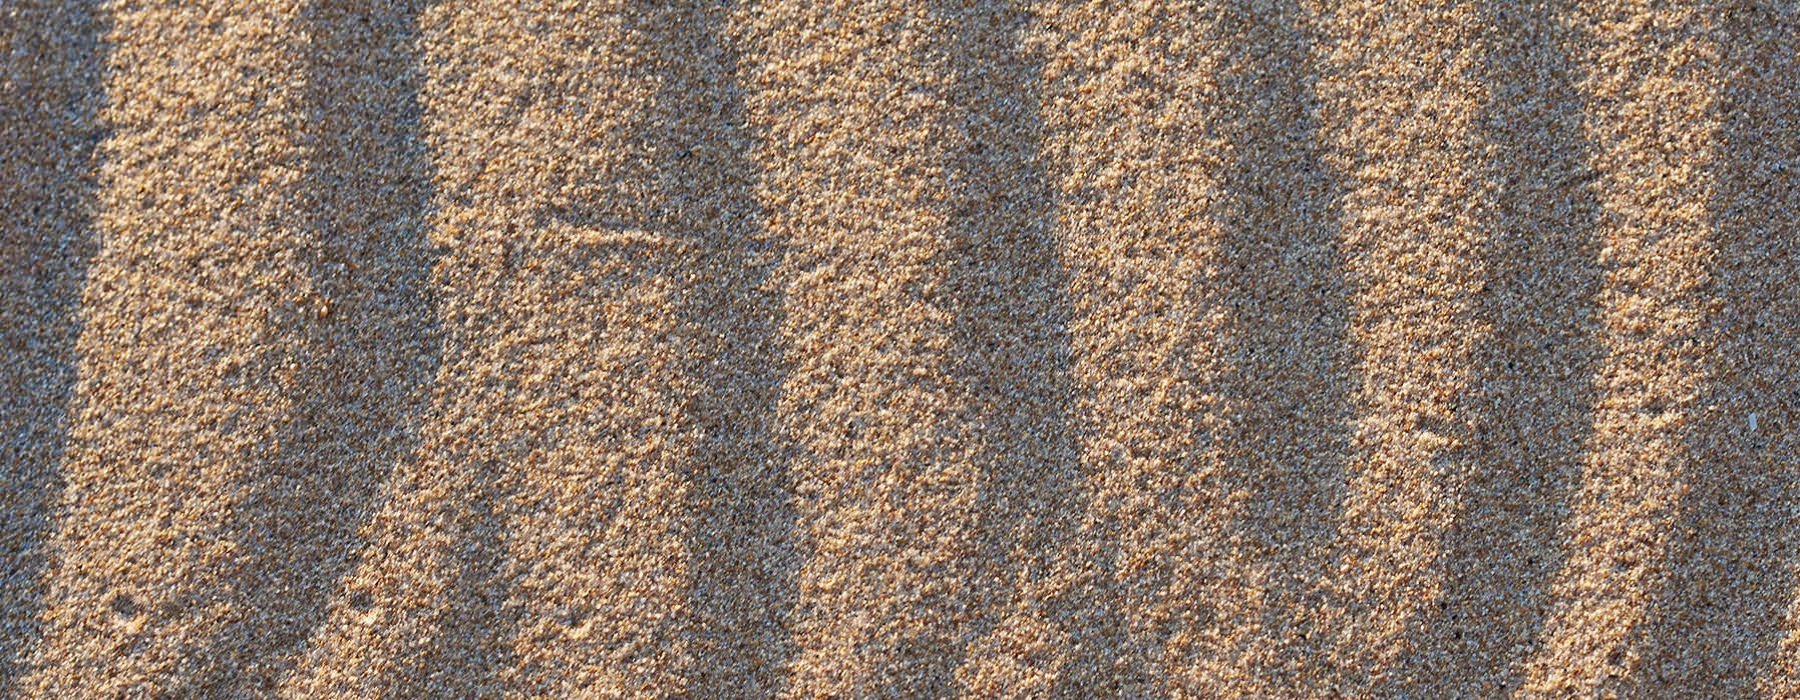 Closeup picture of the sand at the beach